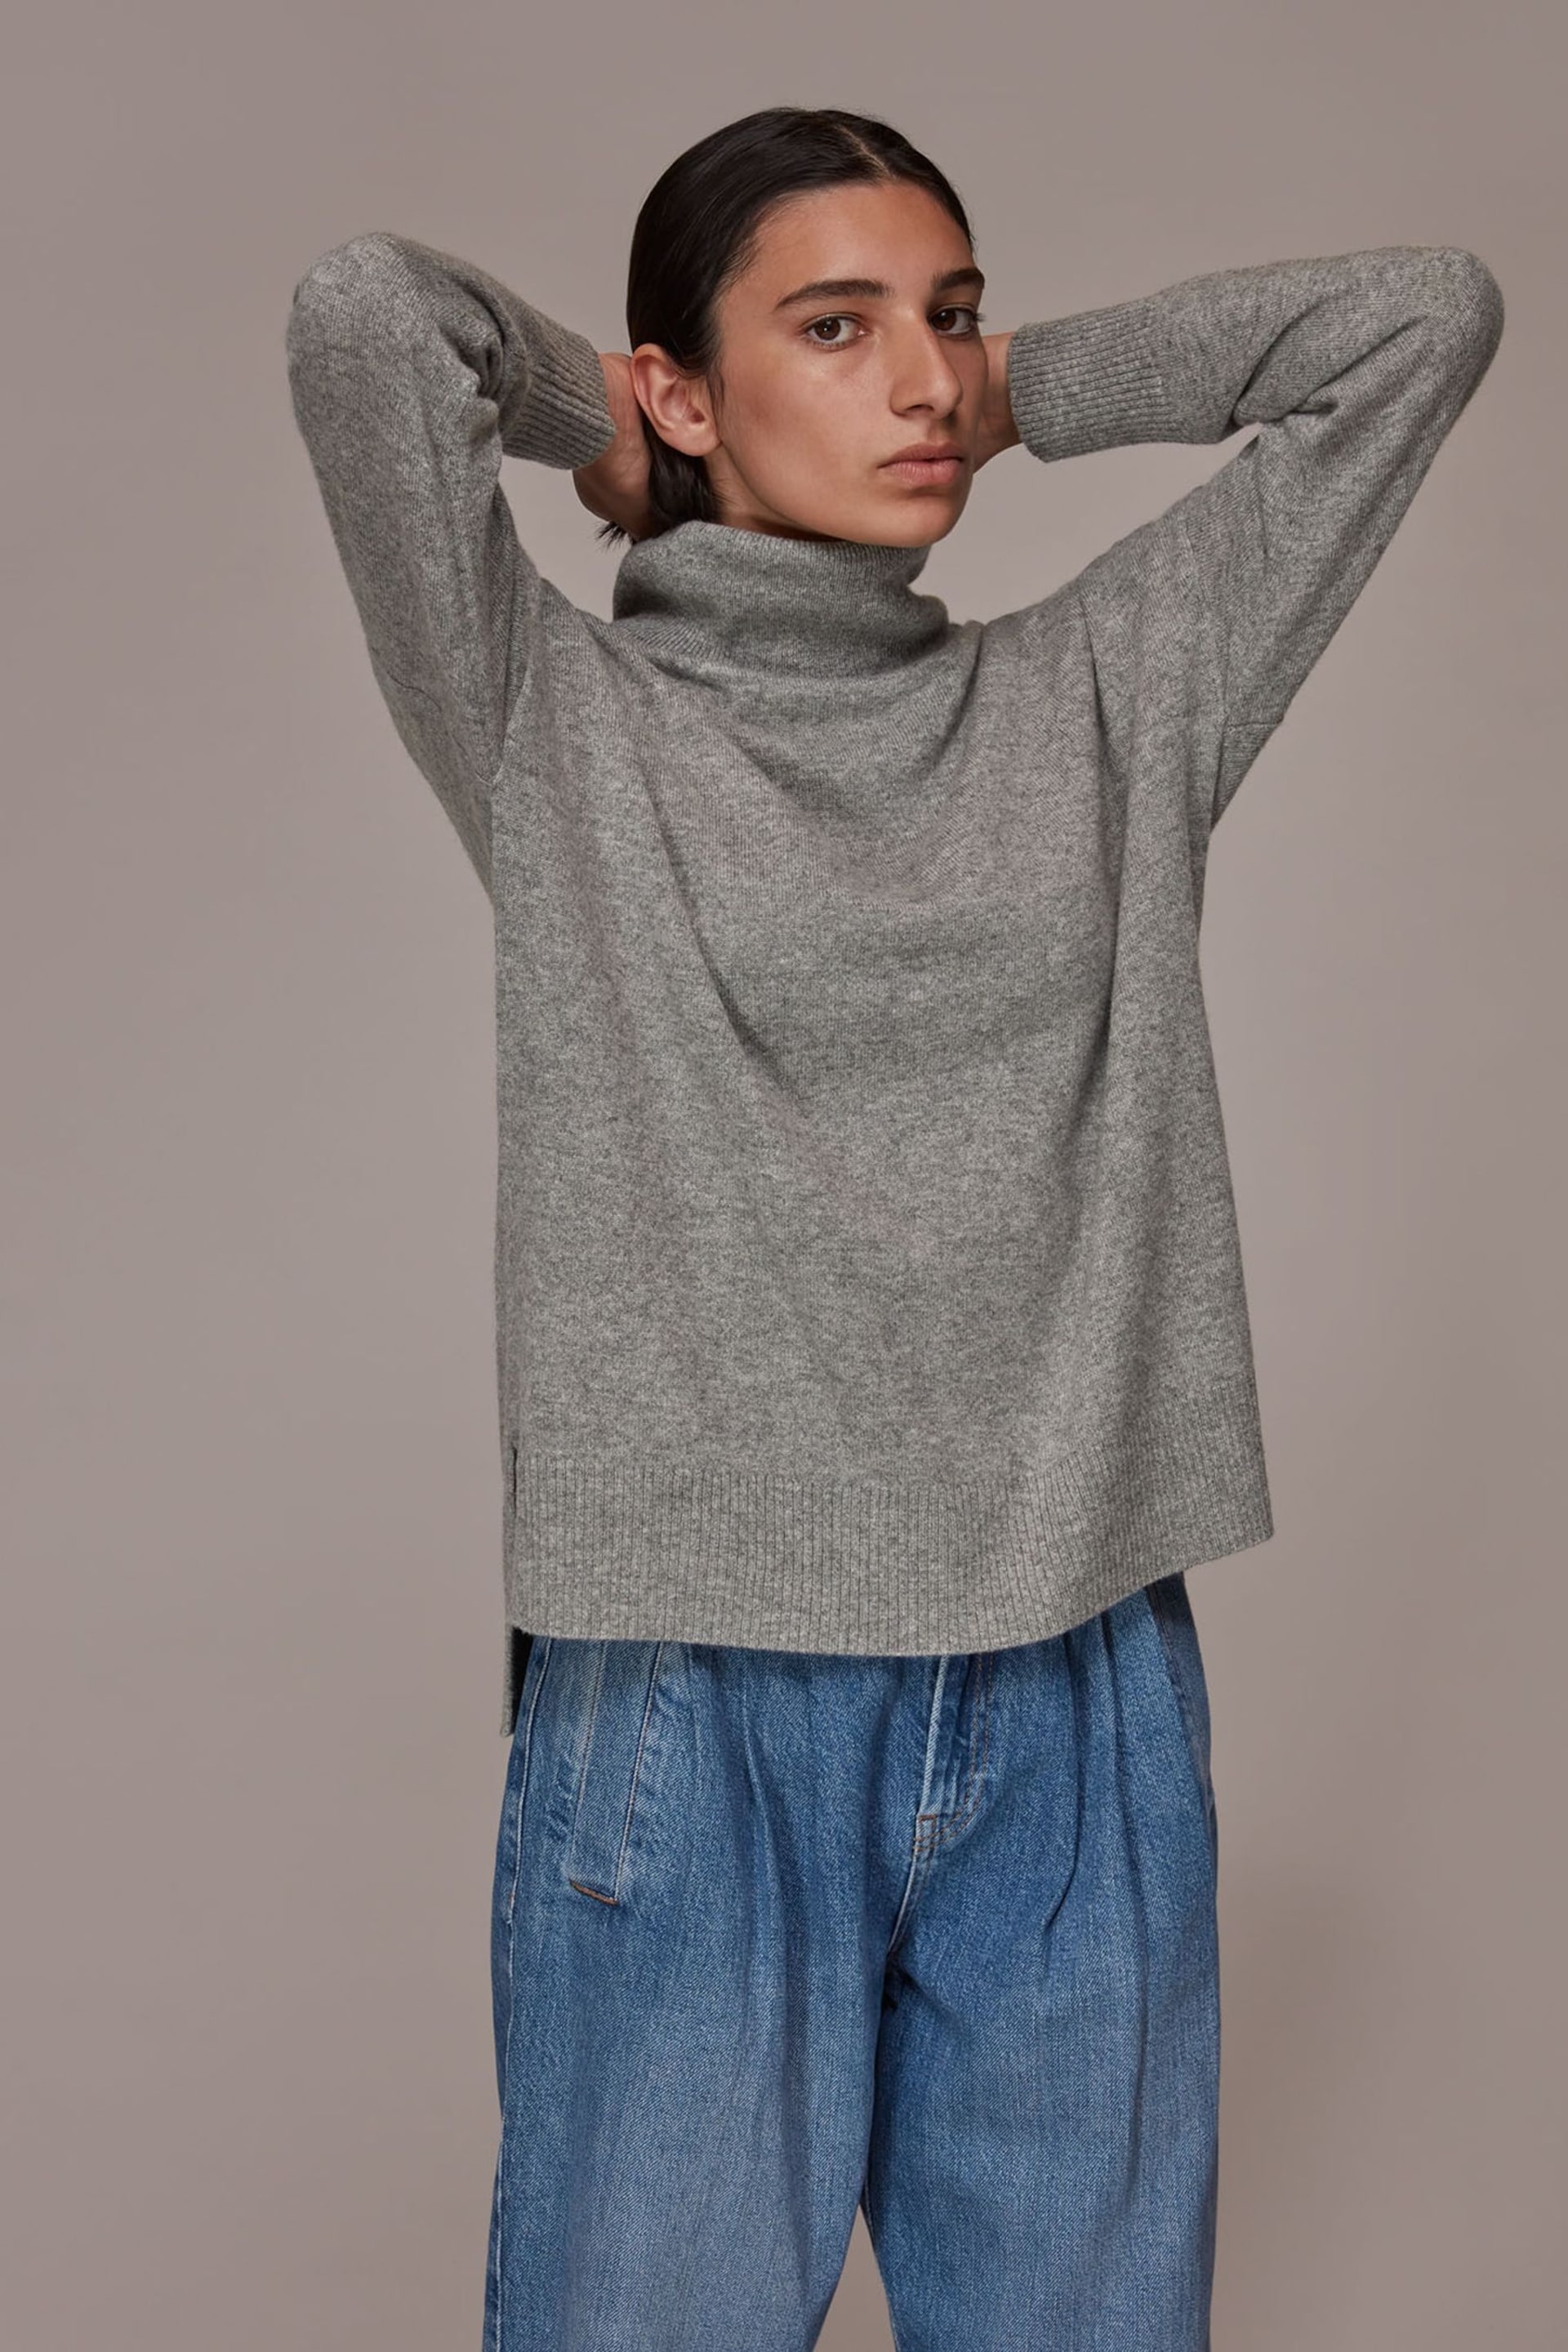 Whistles Cashmere Roll Neck Jumper - Image 3 of 5